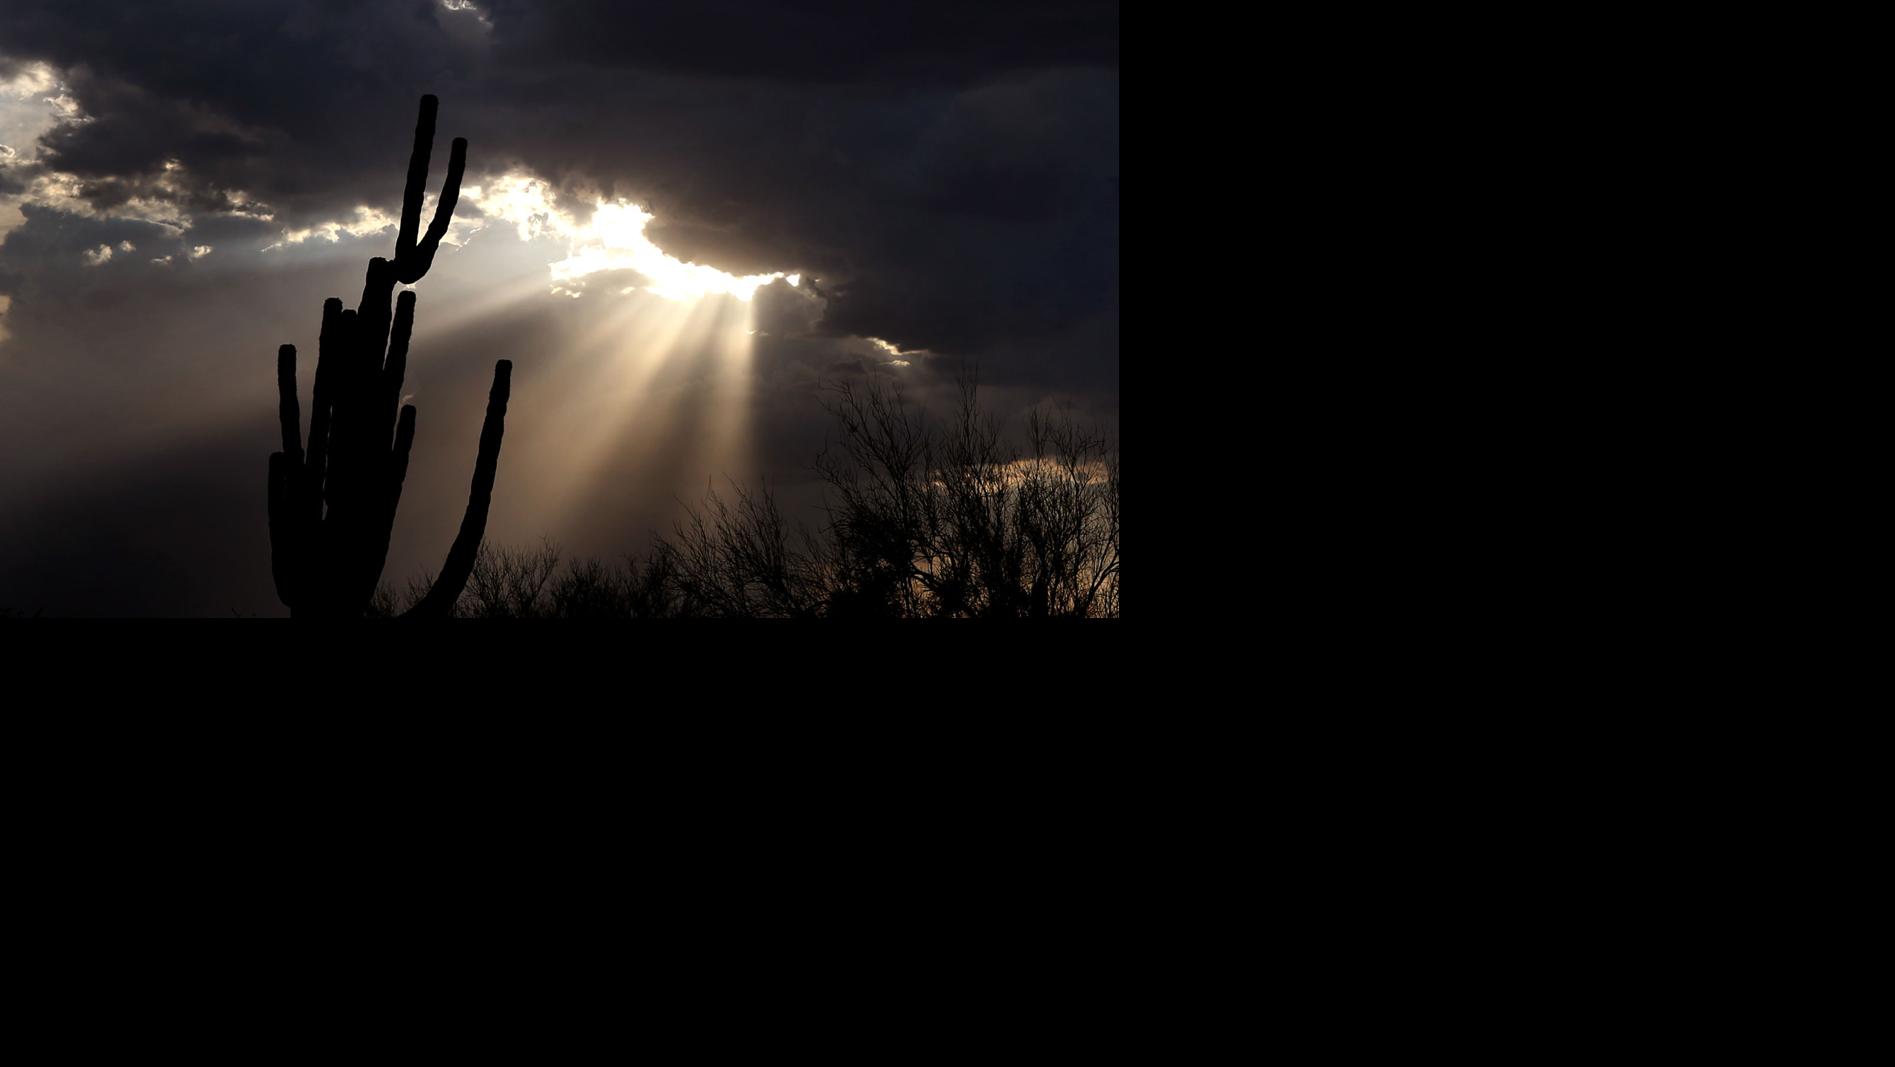 39 photos of intense Tucson monsoon storms Tucson Summer Guide